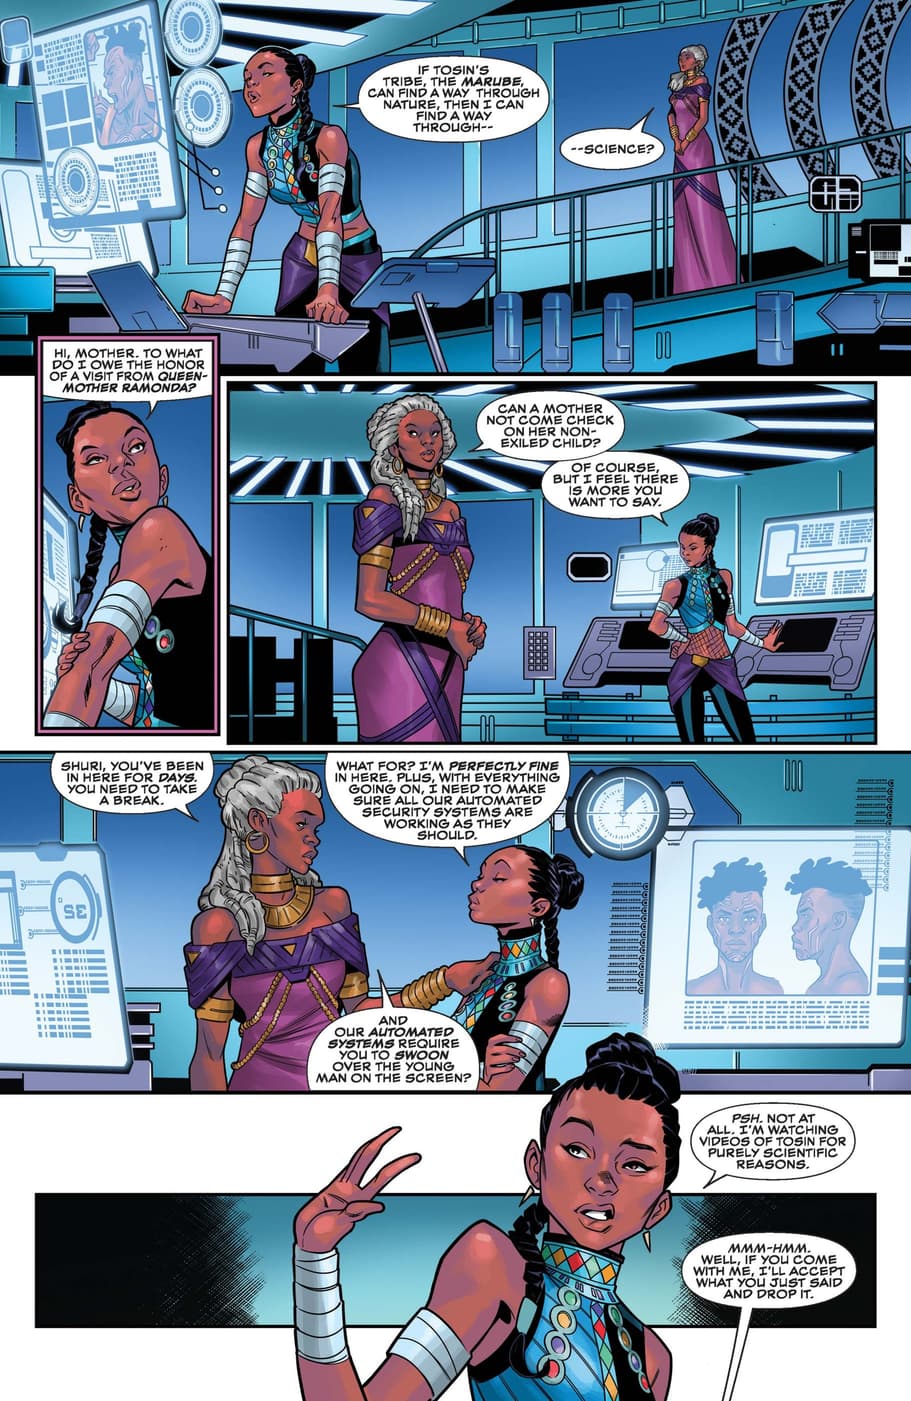 Preview from WAKANDA (2022) #1 by Stephanie Williams, Paco Medina, and Bryan Valenza.